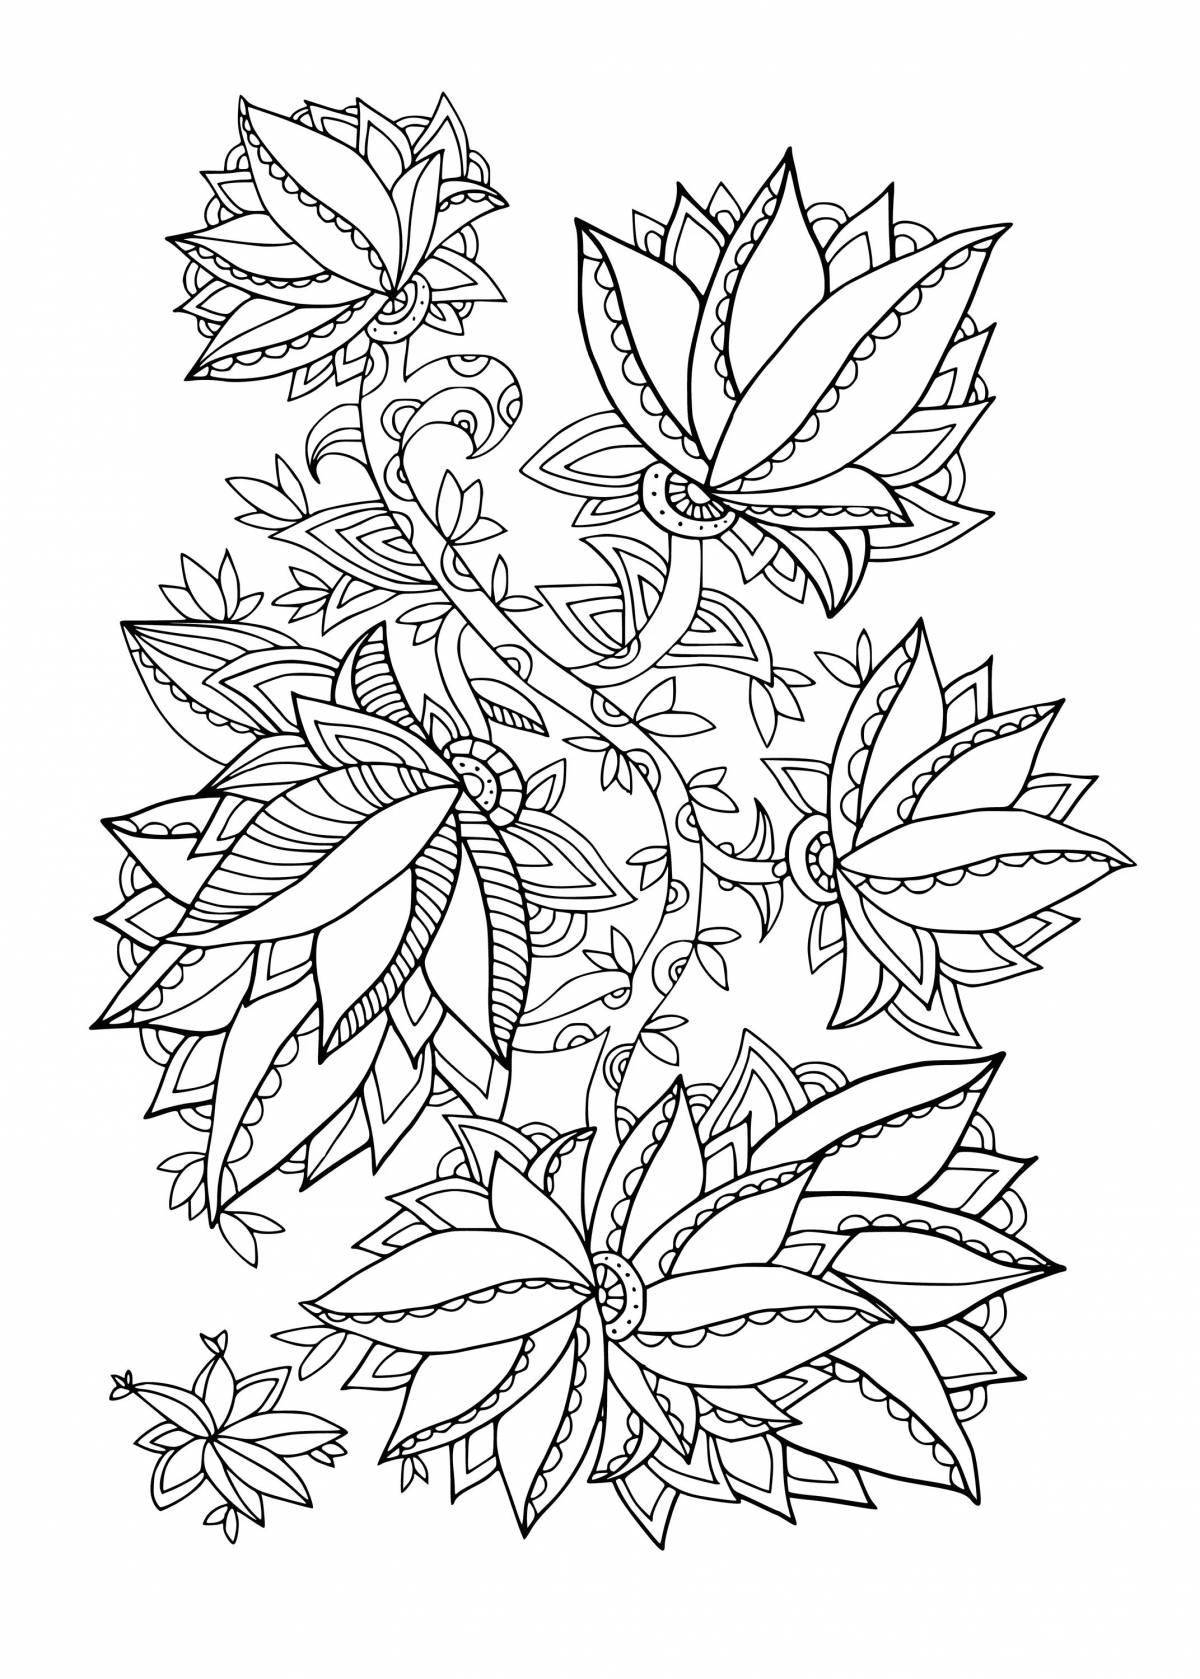 Exquisite patterned coloring book